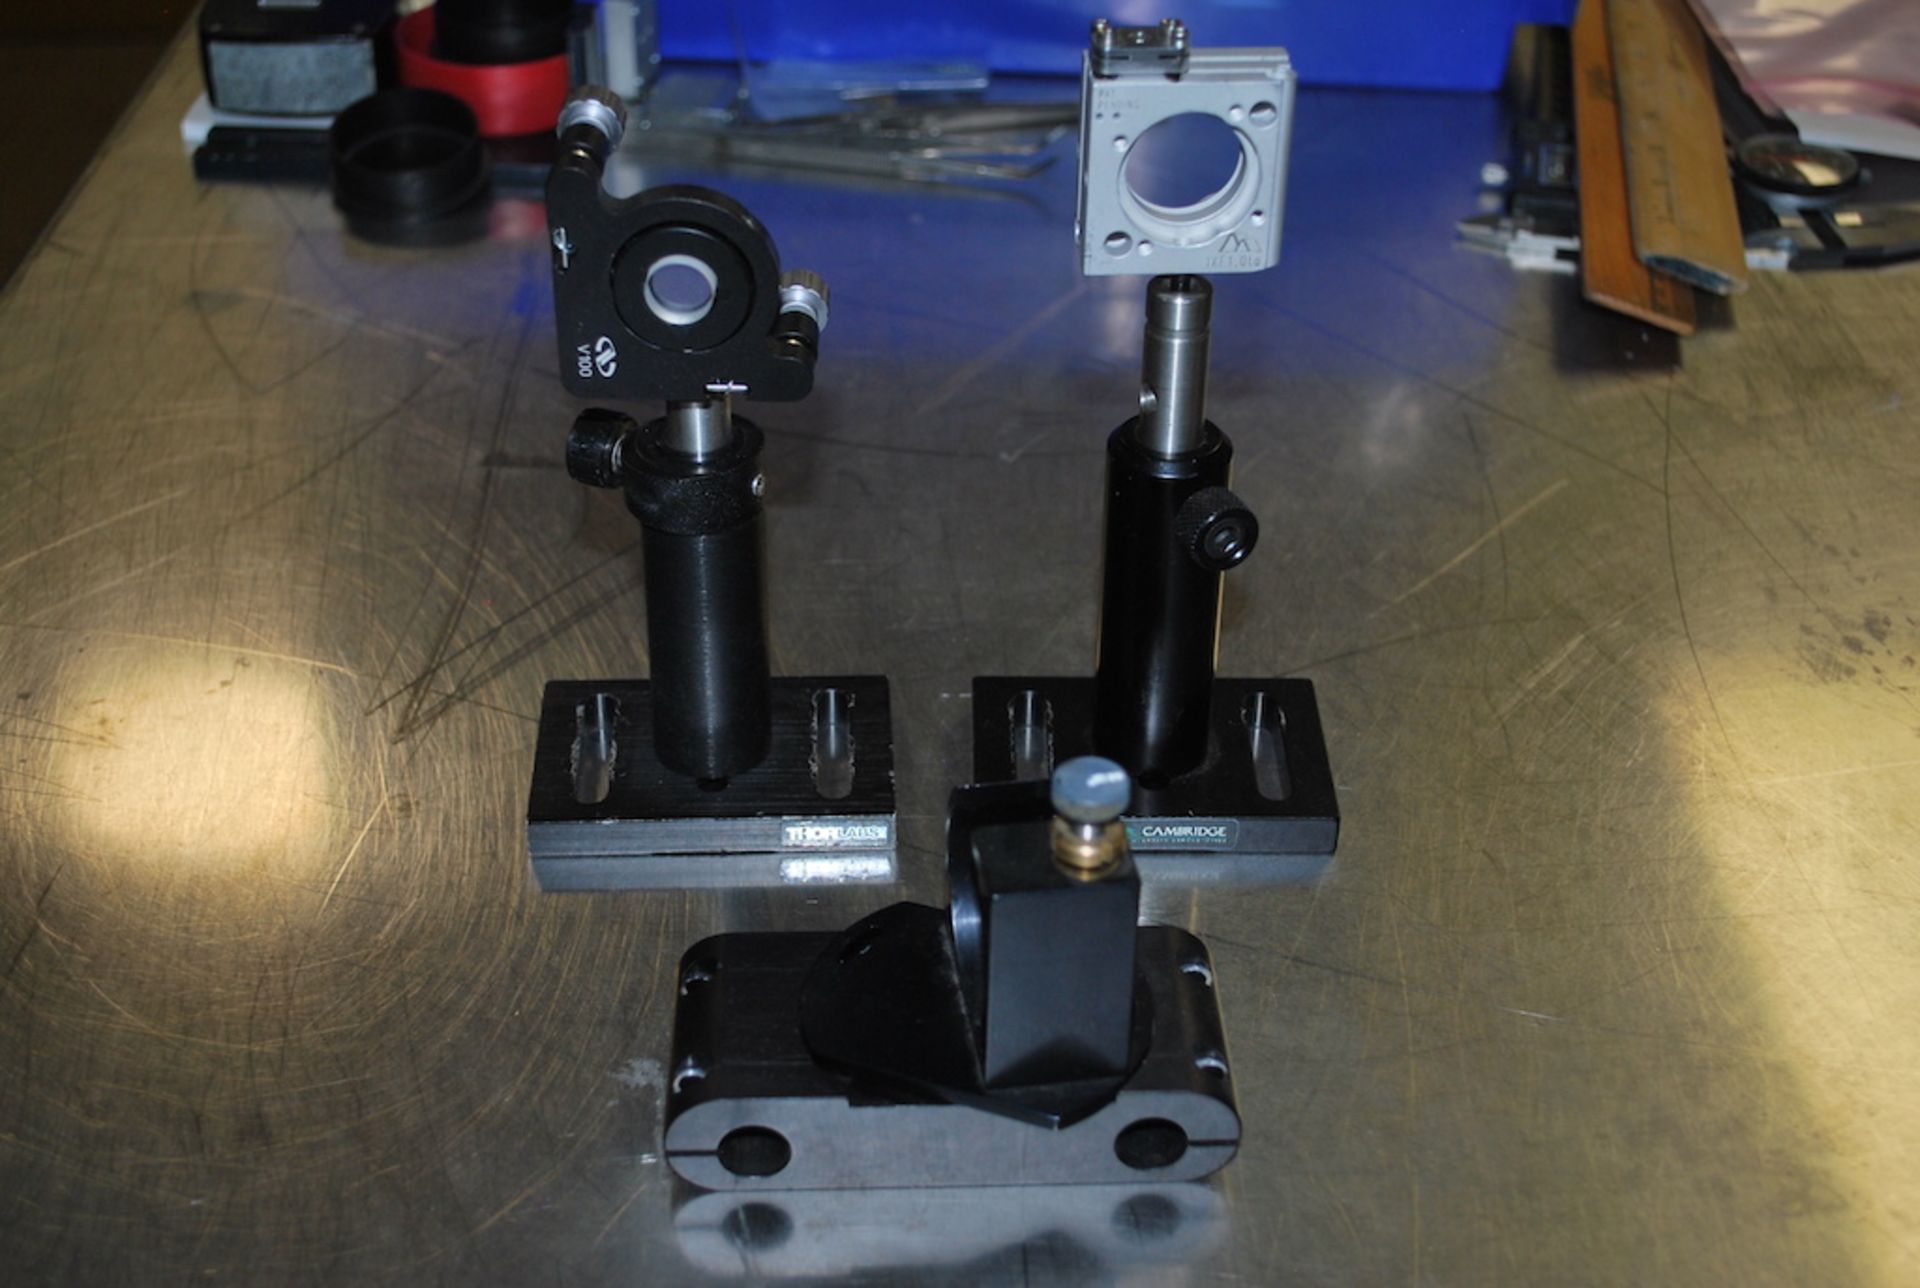 Qty-3 1" XY optical mounts on stands + Dispersion prism ( 25 % - 75% ratio ) - Image 11 of 14